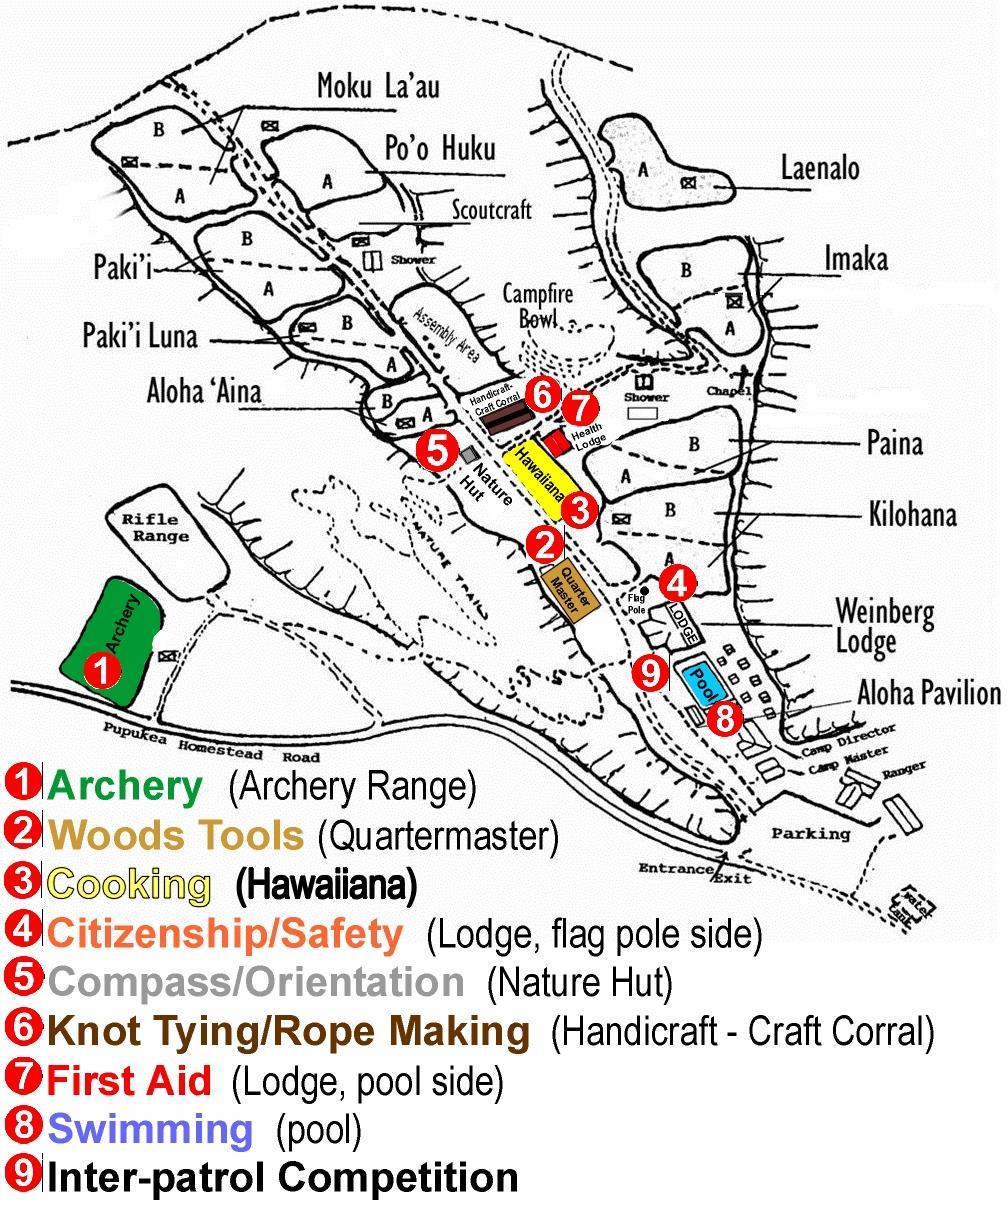 Camp Pupukea Layout Map Youth Patrol members and their leaders will camp in campsites Kilohana A & B and Paina A & B: Patrol 1 in Kilohana A Patrol 5 in Paina A Patrol 2 in Kilohana A